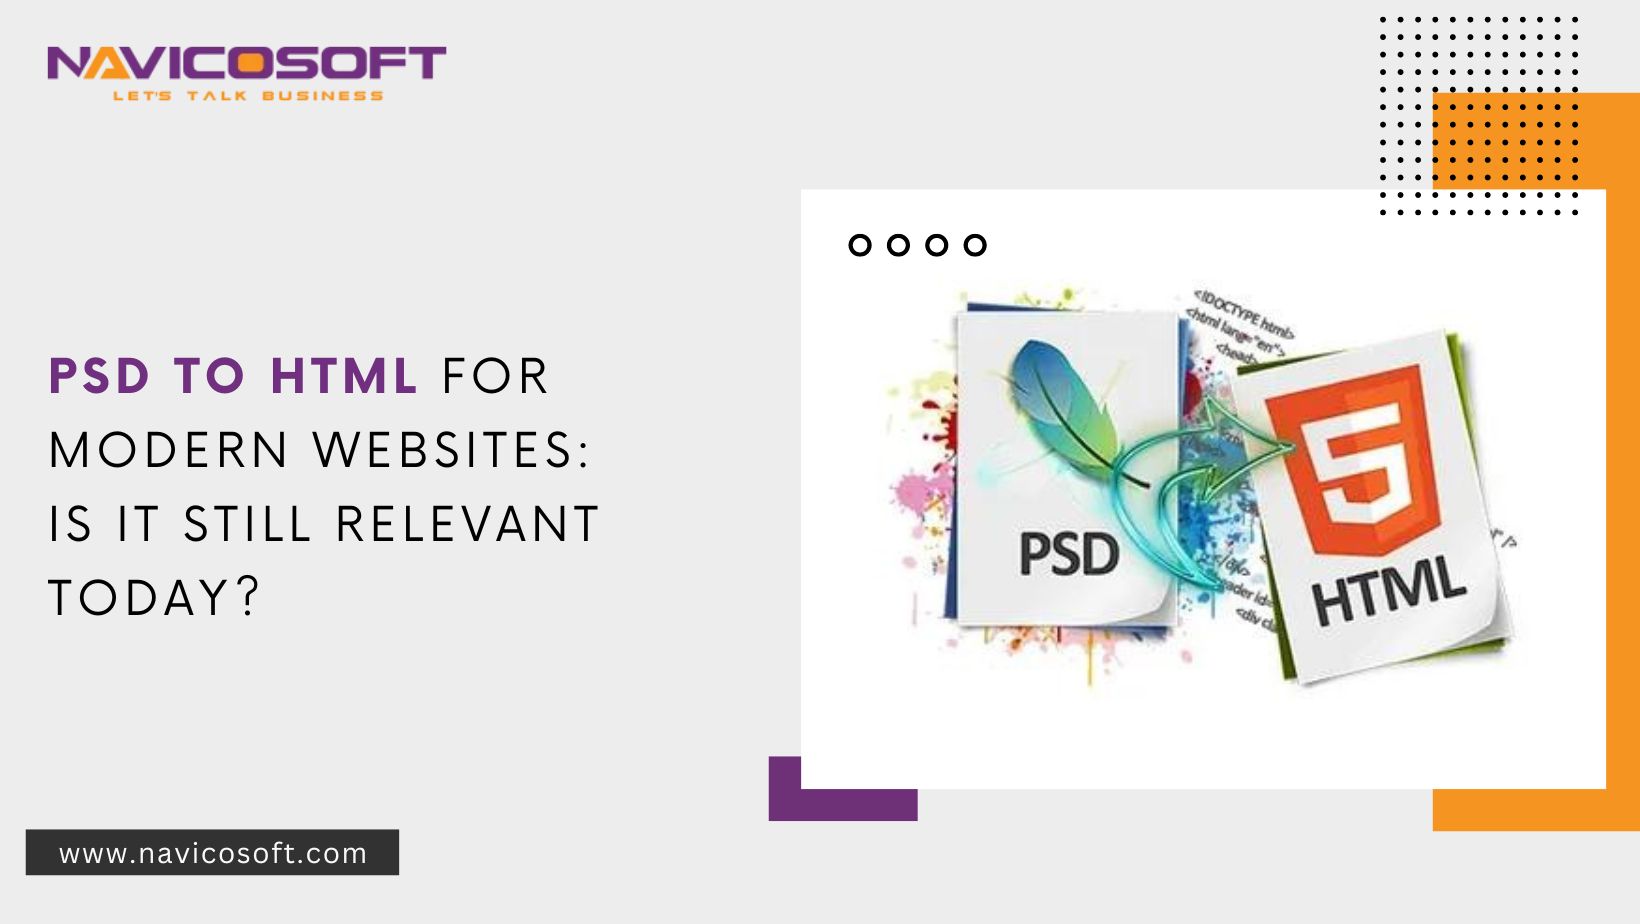 PSD to HTML for modern websites